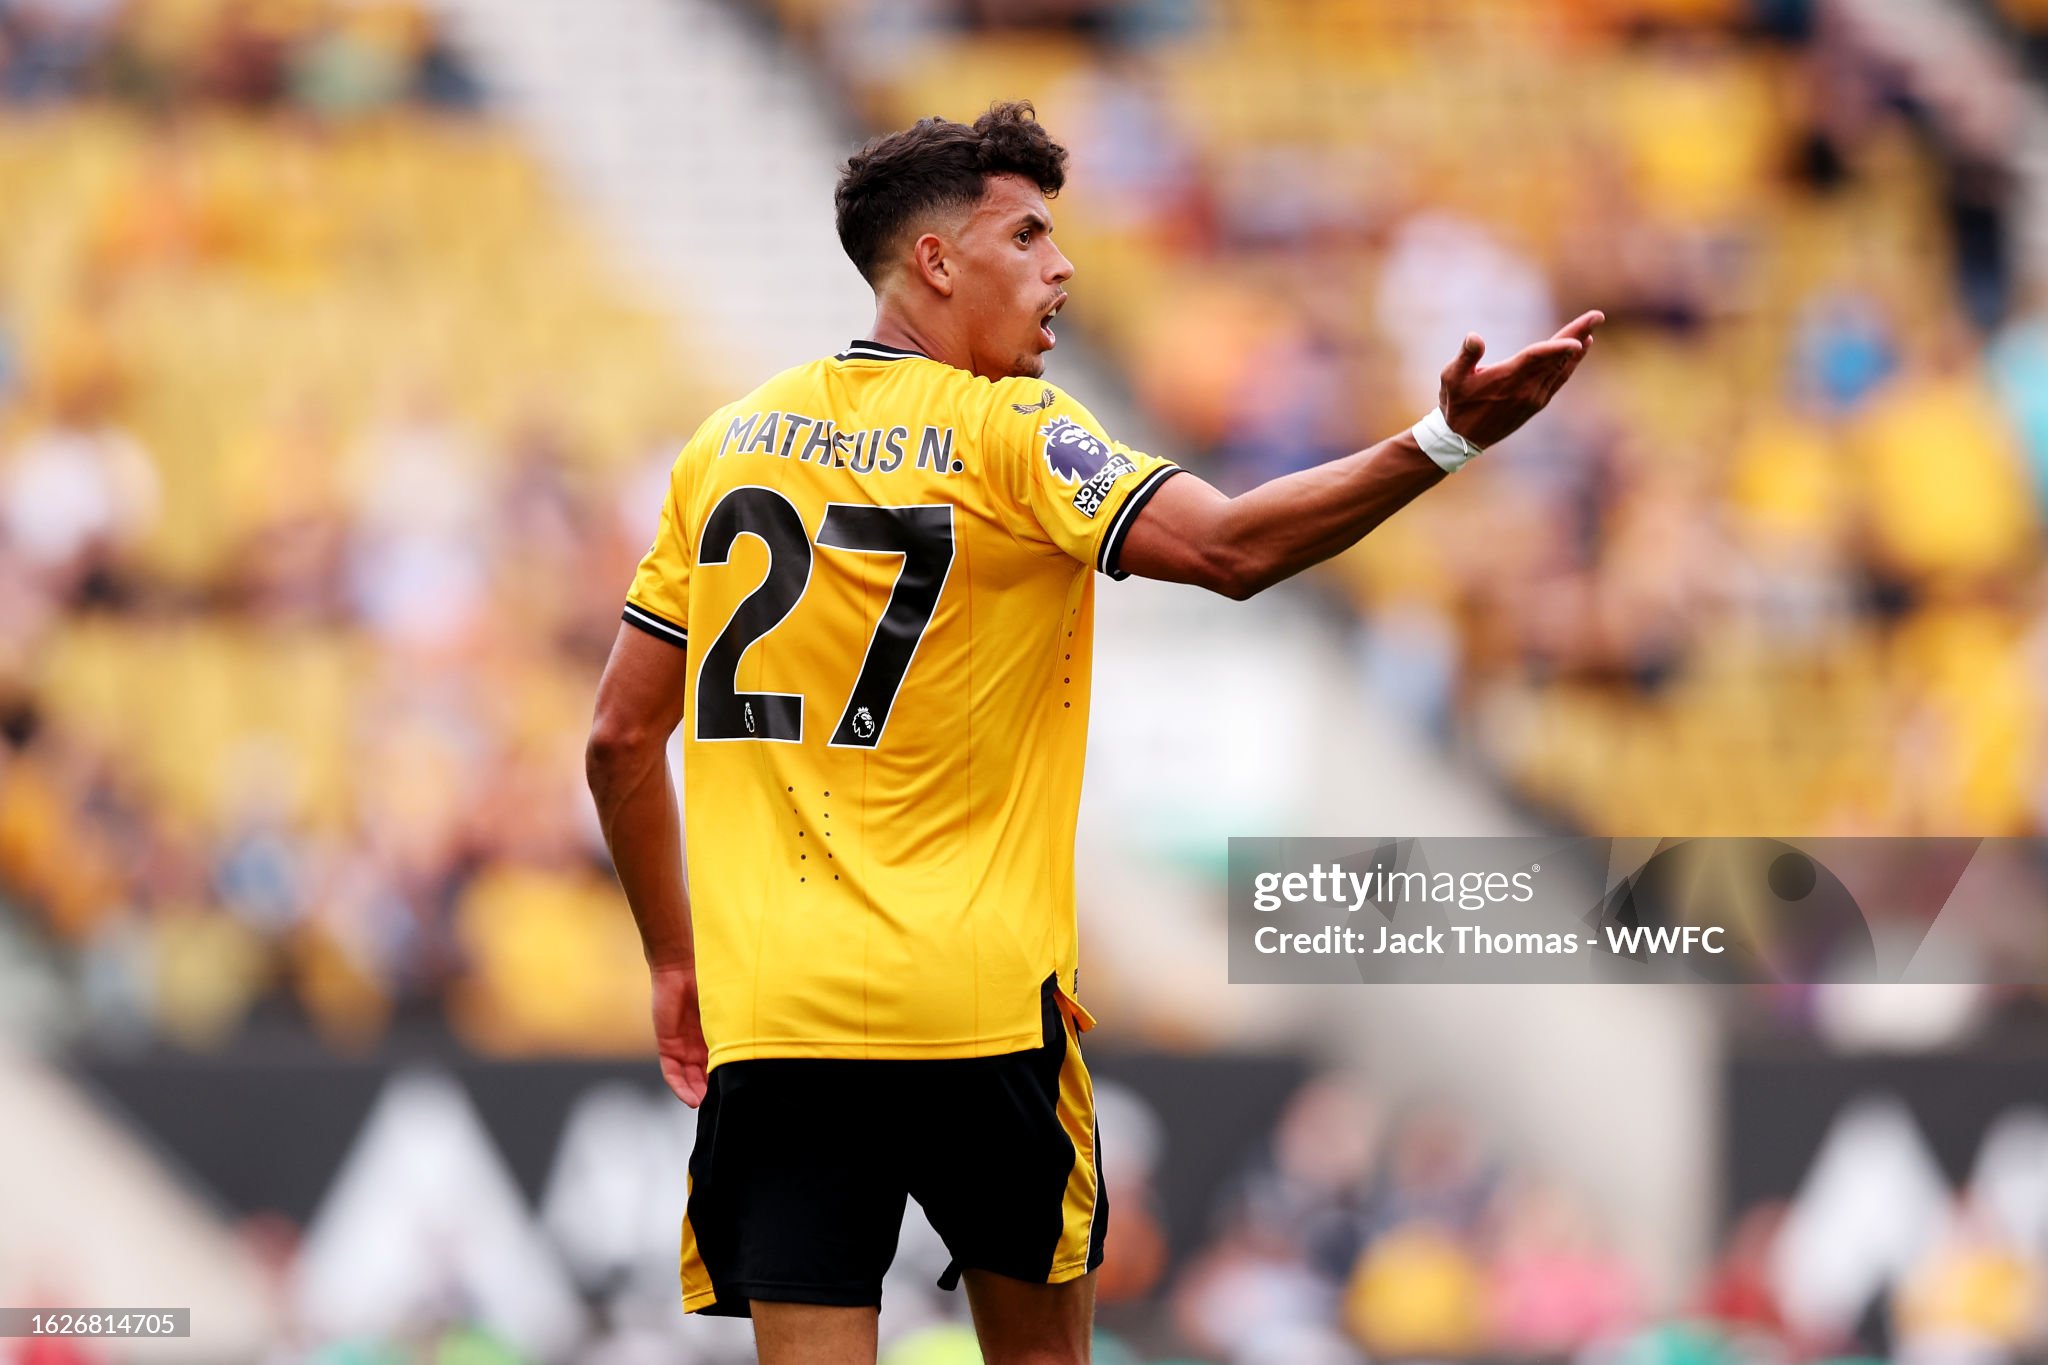 Man City interested in signing Wolves’ Matheus Nunes